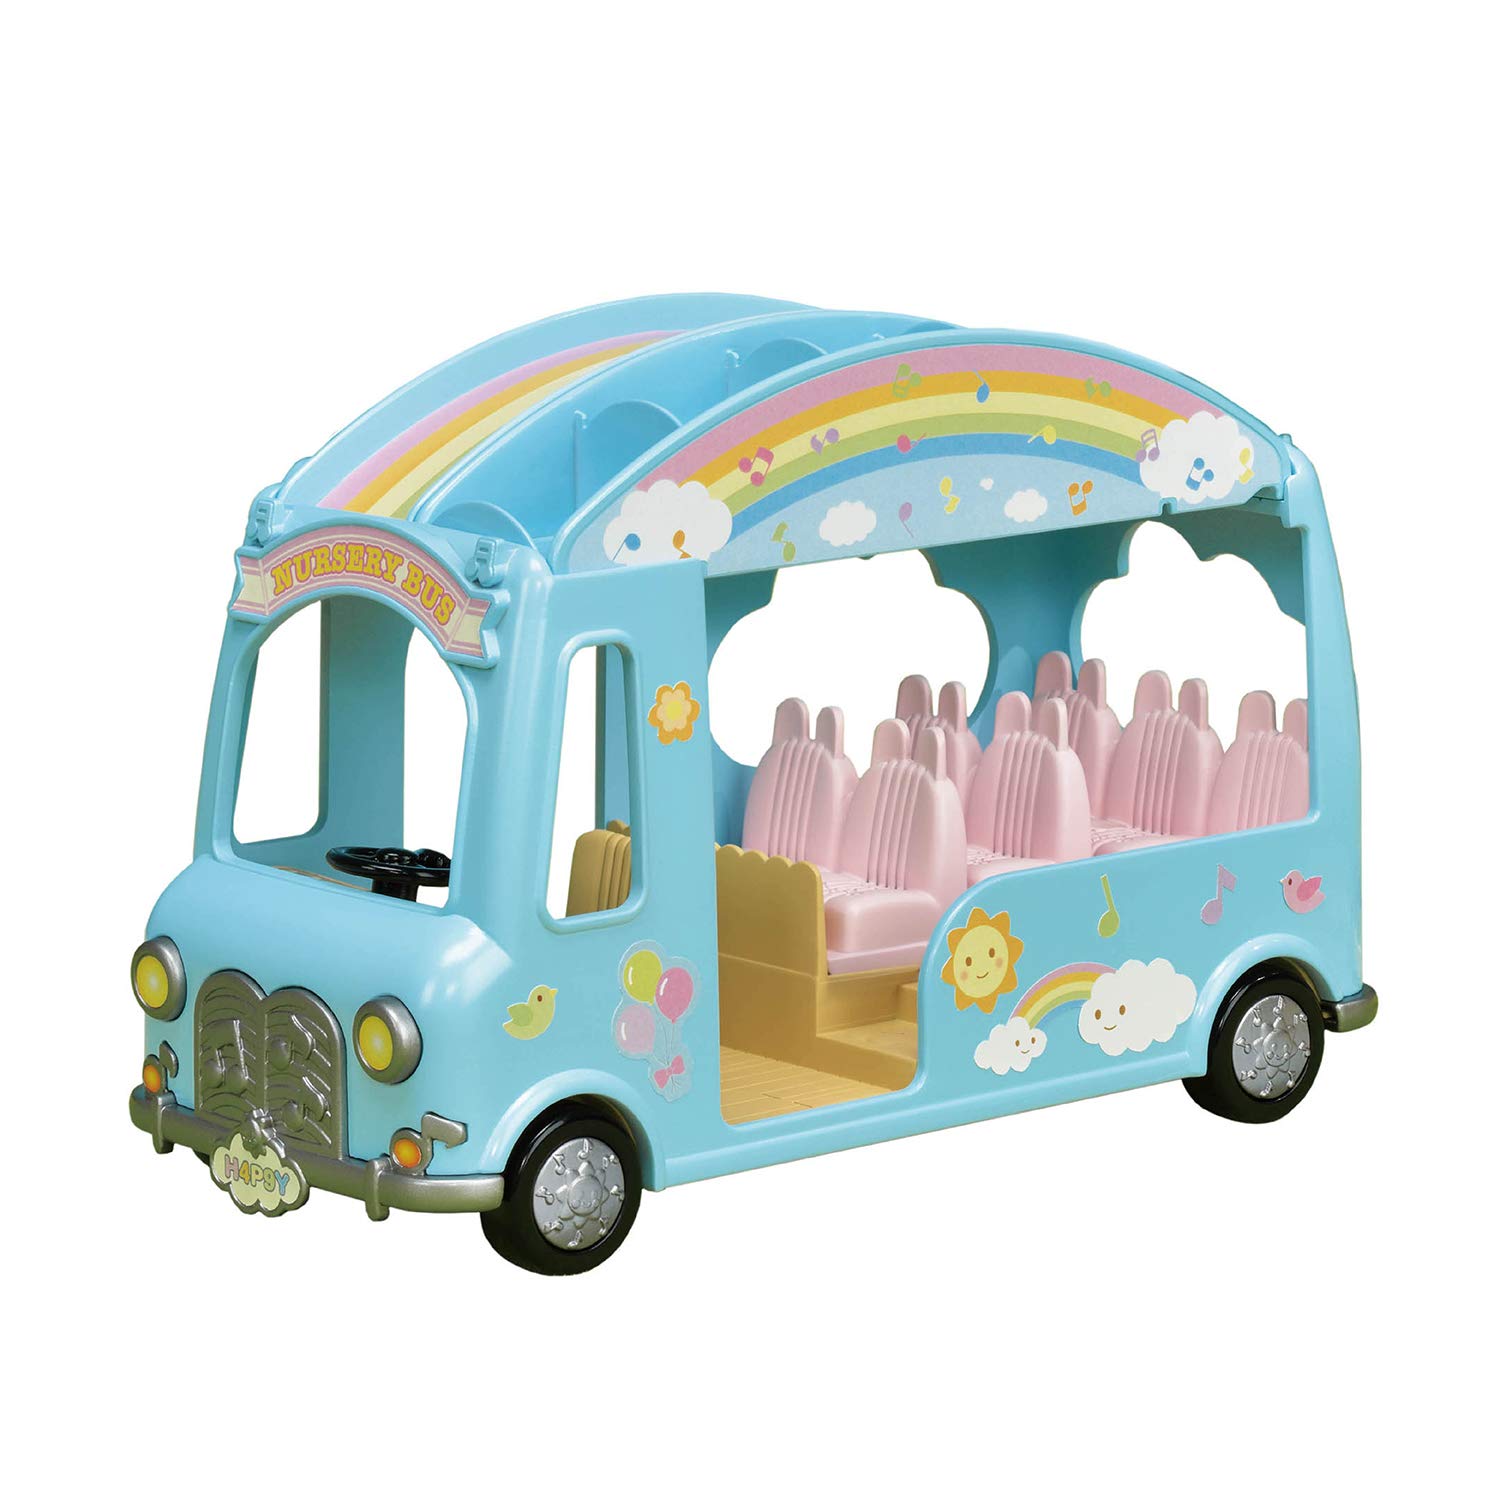 Calico Critters Sunshine Nursery Bus for Dolls, Toy Vehicle seats up to 12 collectible figures , Blue